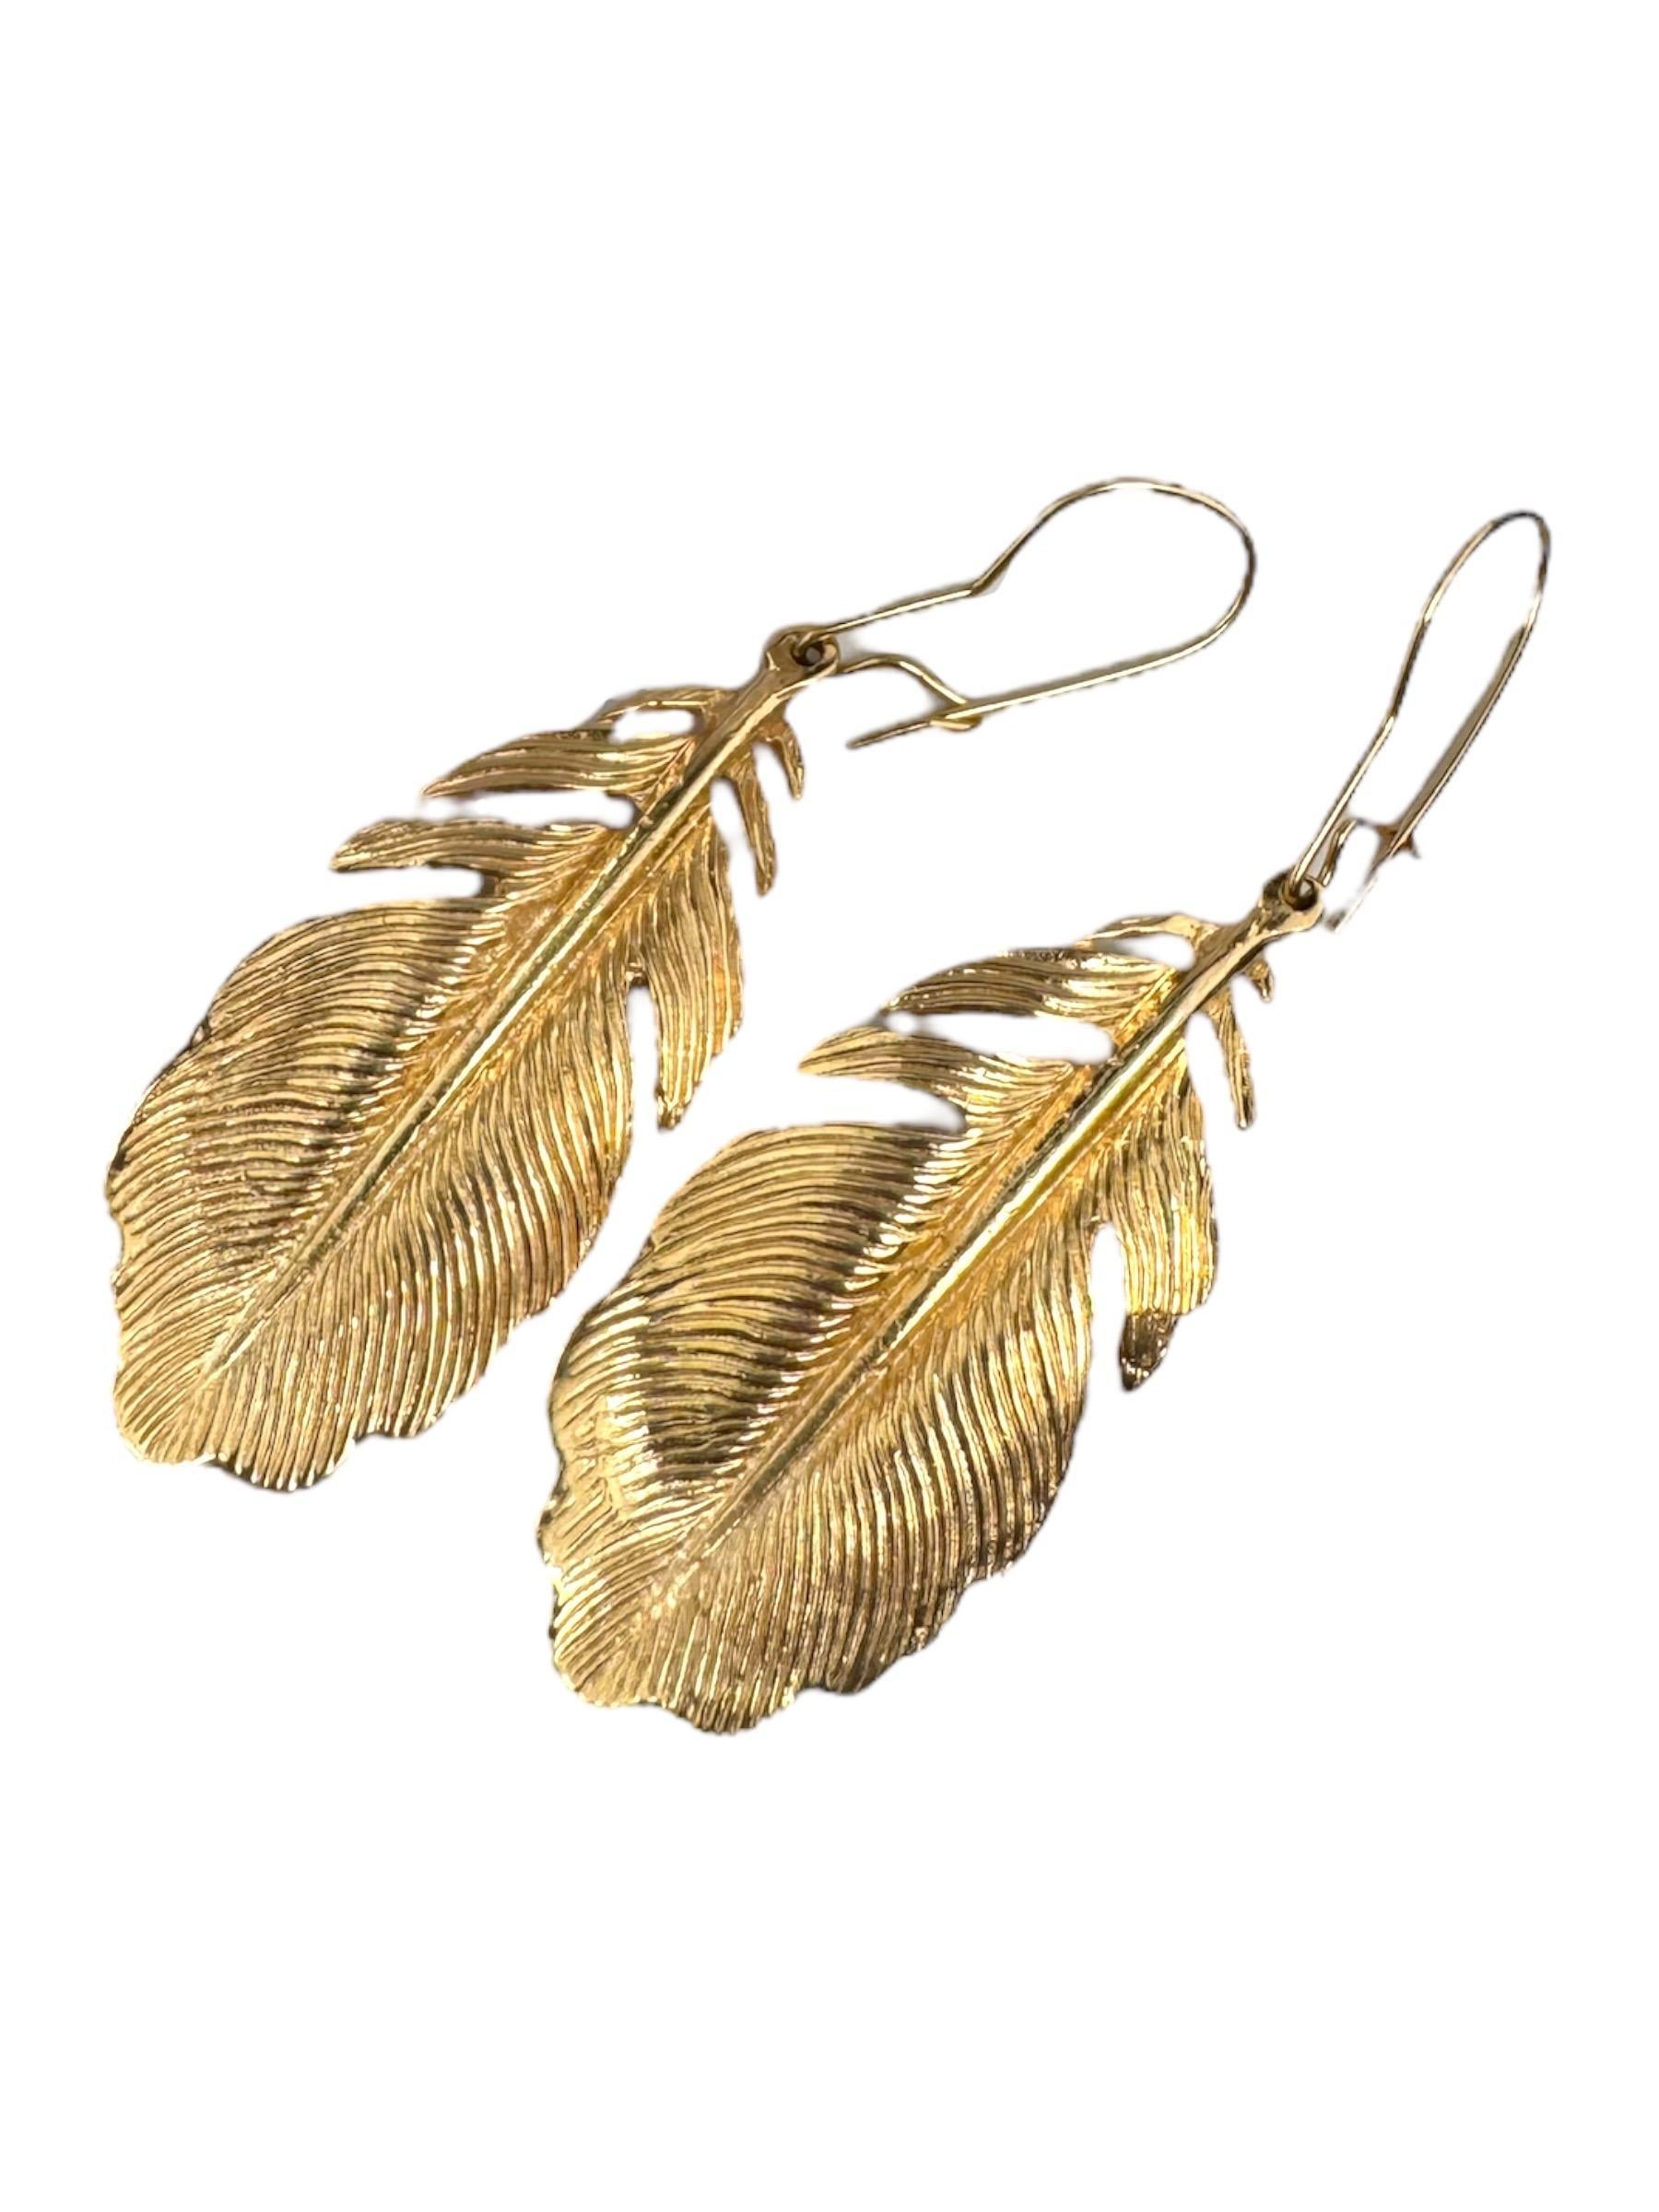 These magnificent earrings have so much detail!
Each feather is beautifully engraved!!

Earring Details: 
Metal: 14K Yellow Gold
Weight: 11.6 Grams
Feather Size: 1.5” X 0.75”
Total Drop Off Ear: 2”

Matching Necklace Currently Available

Item: